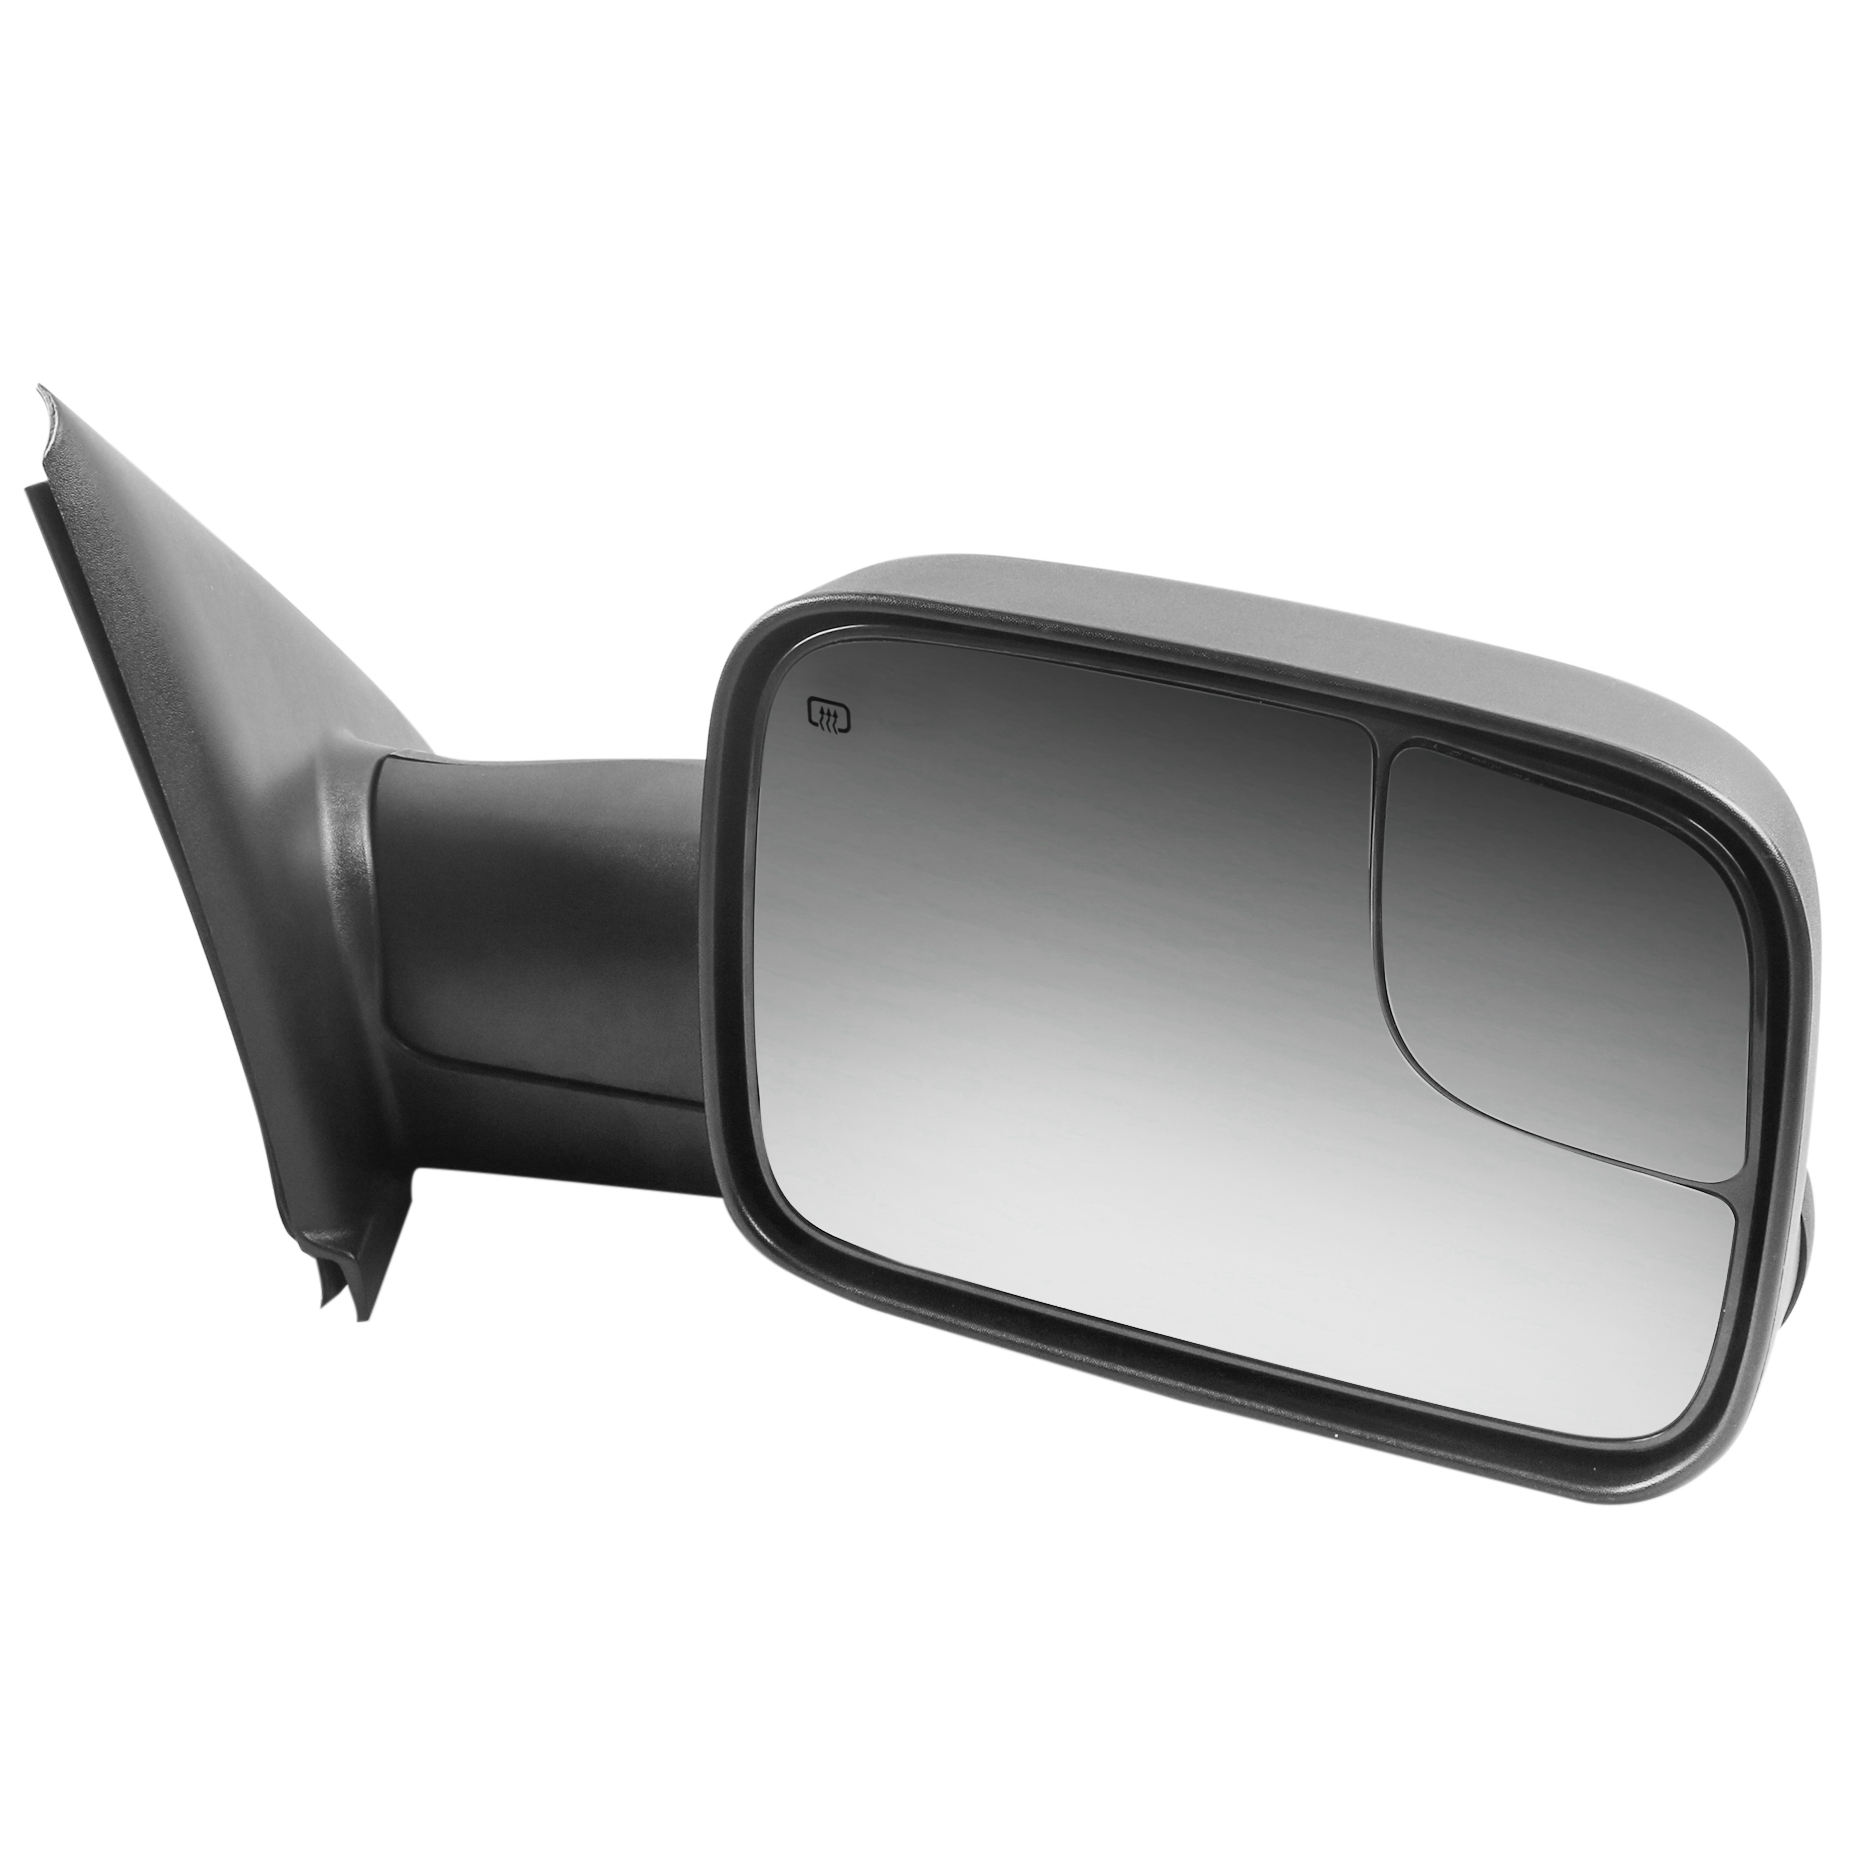 Passenger Side Power Heated Tow Mirror for 03-08 Dodge Ram 1500-3500 Dual Glass | eBay 2003 Dodge Ram 1500 Passenger Side Mirror